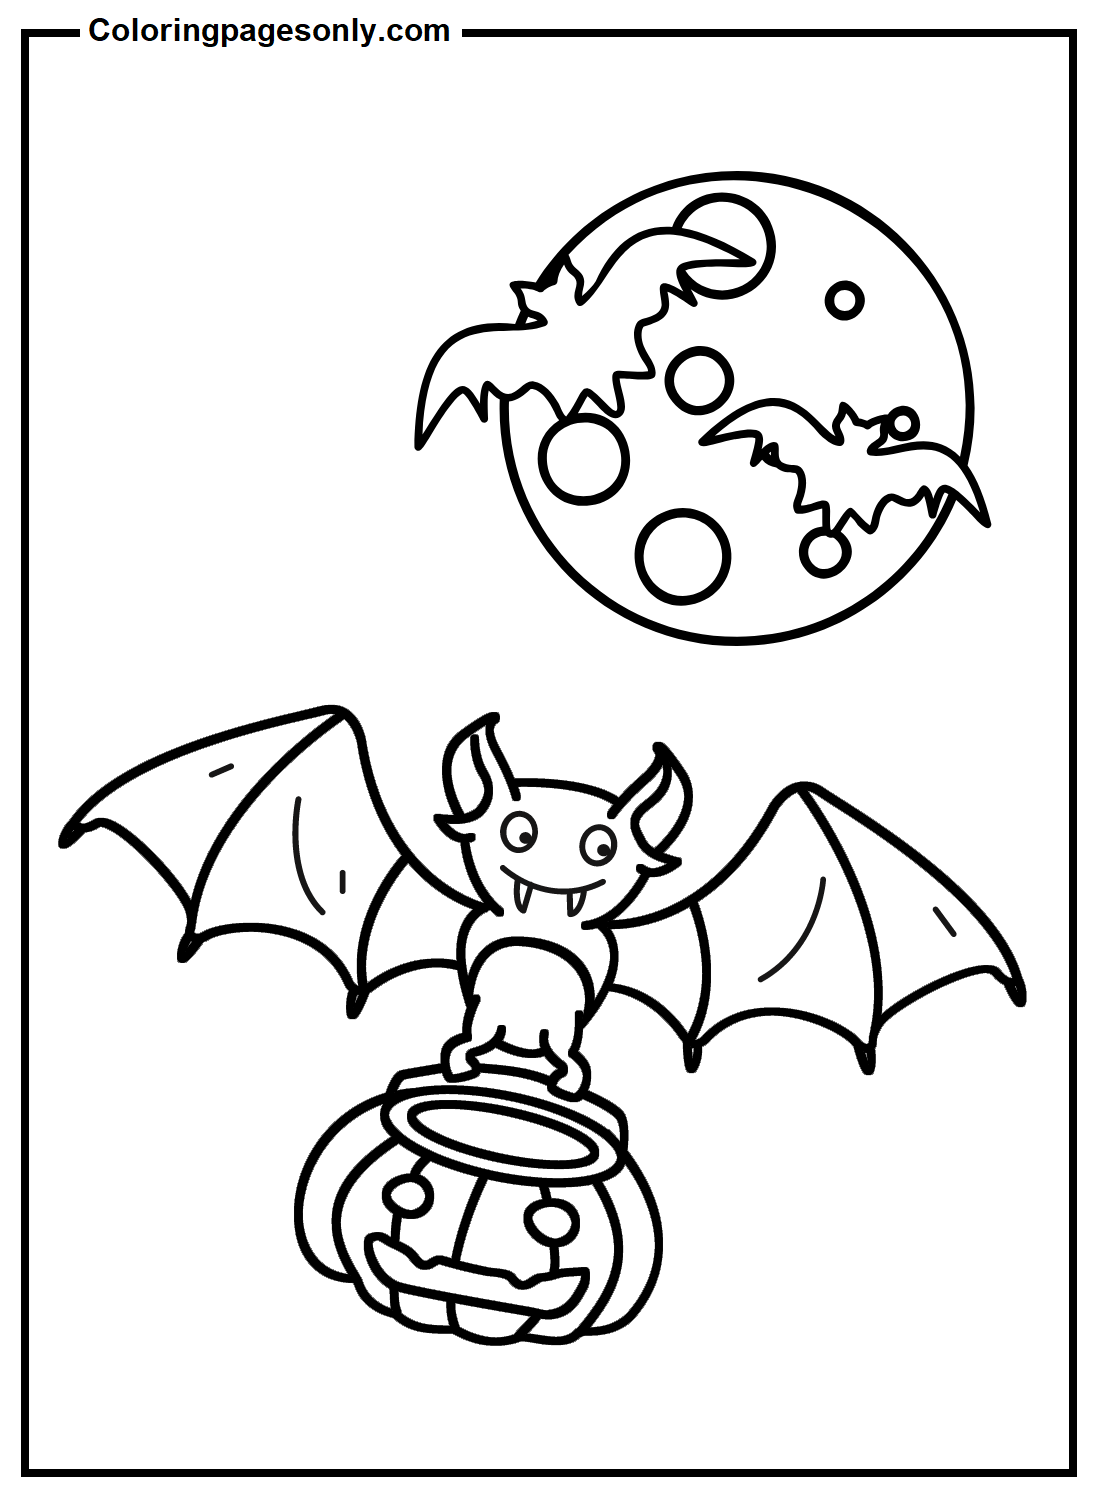 Bats in Halloween Day Coloring Page